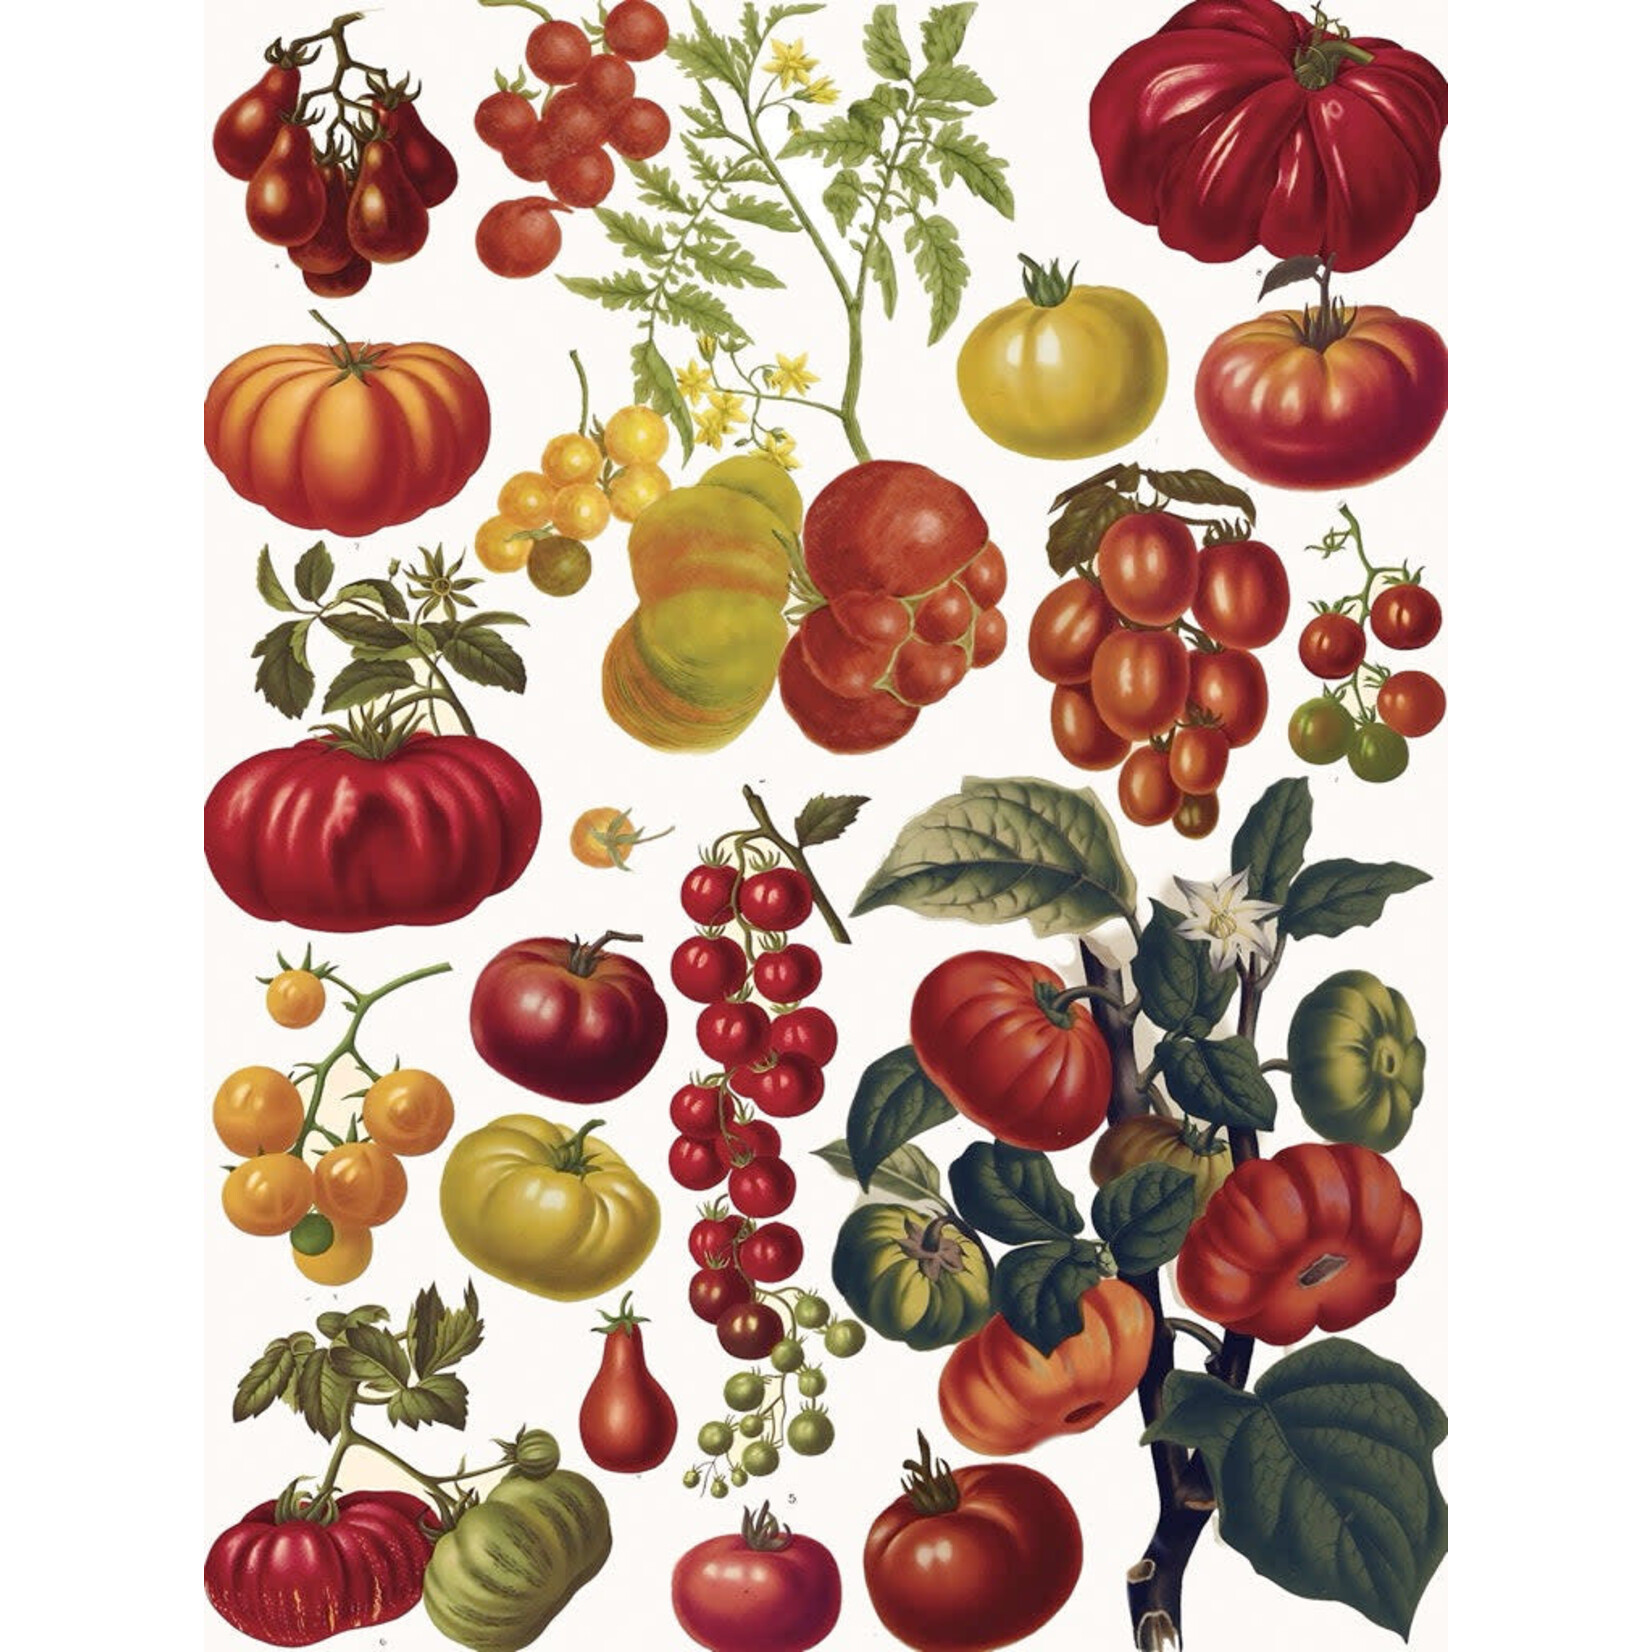 New York Puzzle Co Vintage Collection - Tomatoes 500 Piece Puzzle